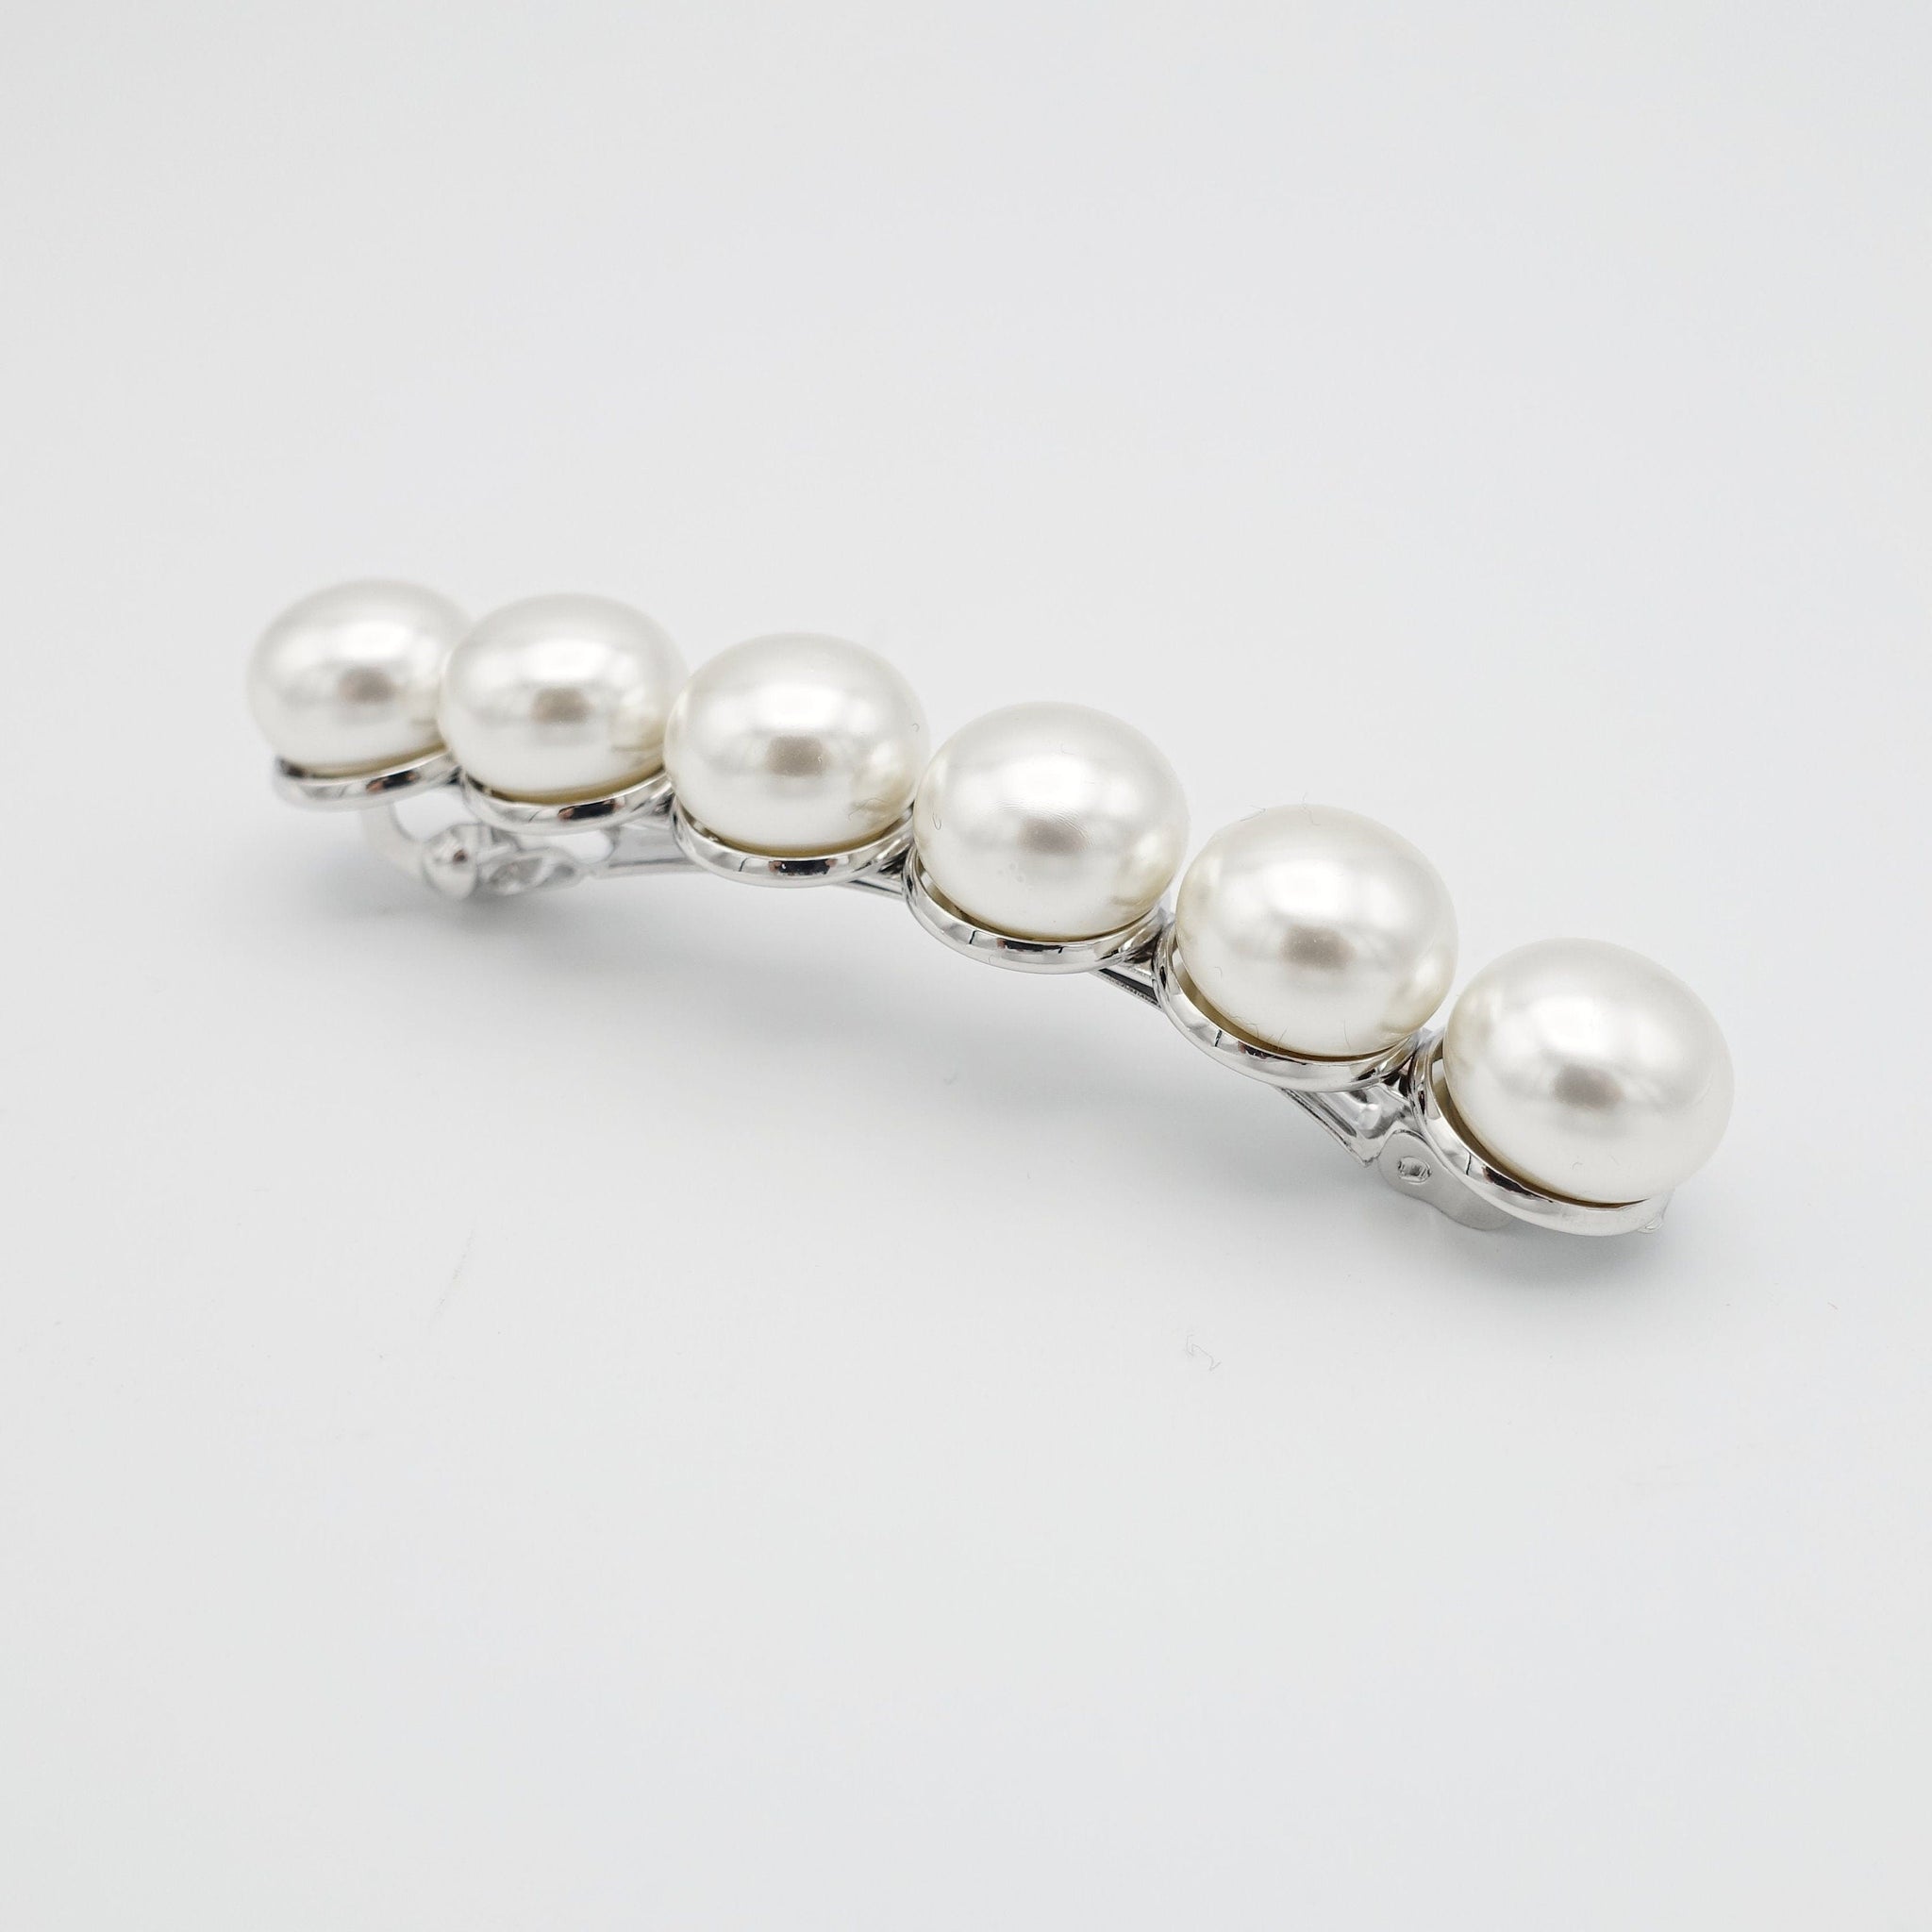 veryshine.com Barrette (Bow) donuts pearl embellished french barrette women hair accessory